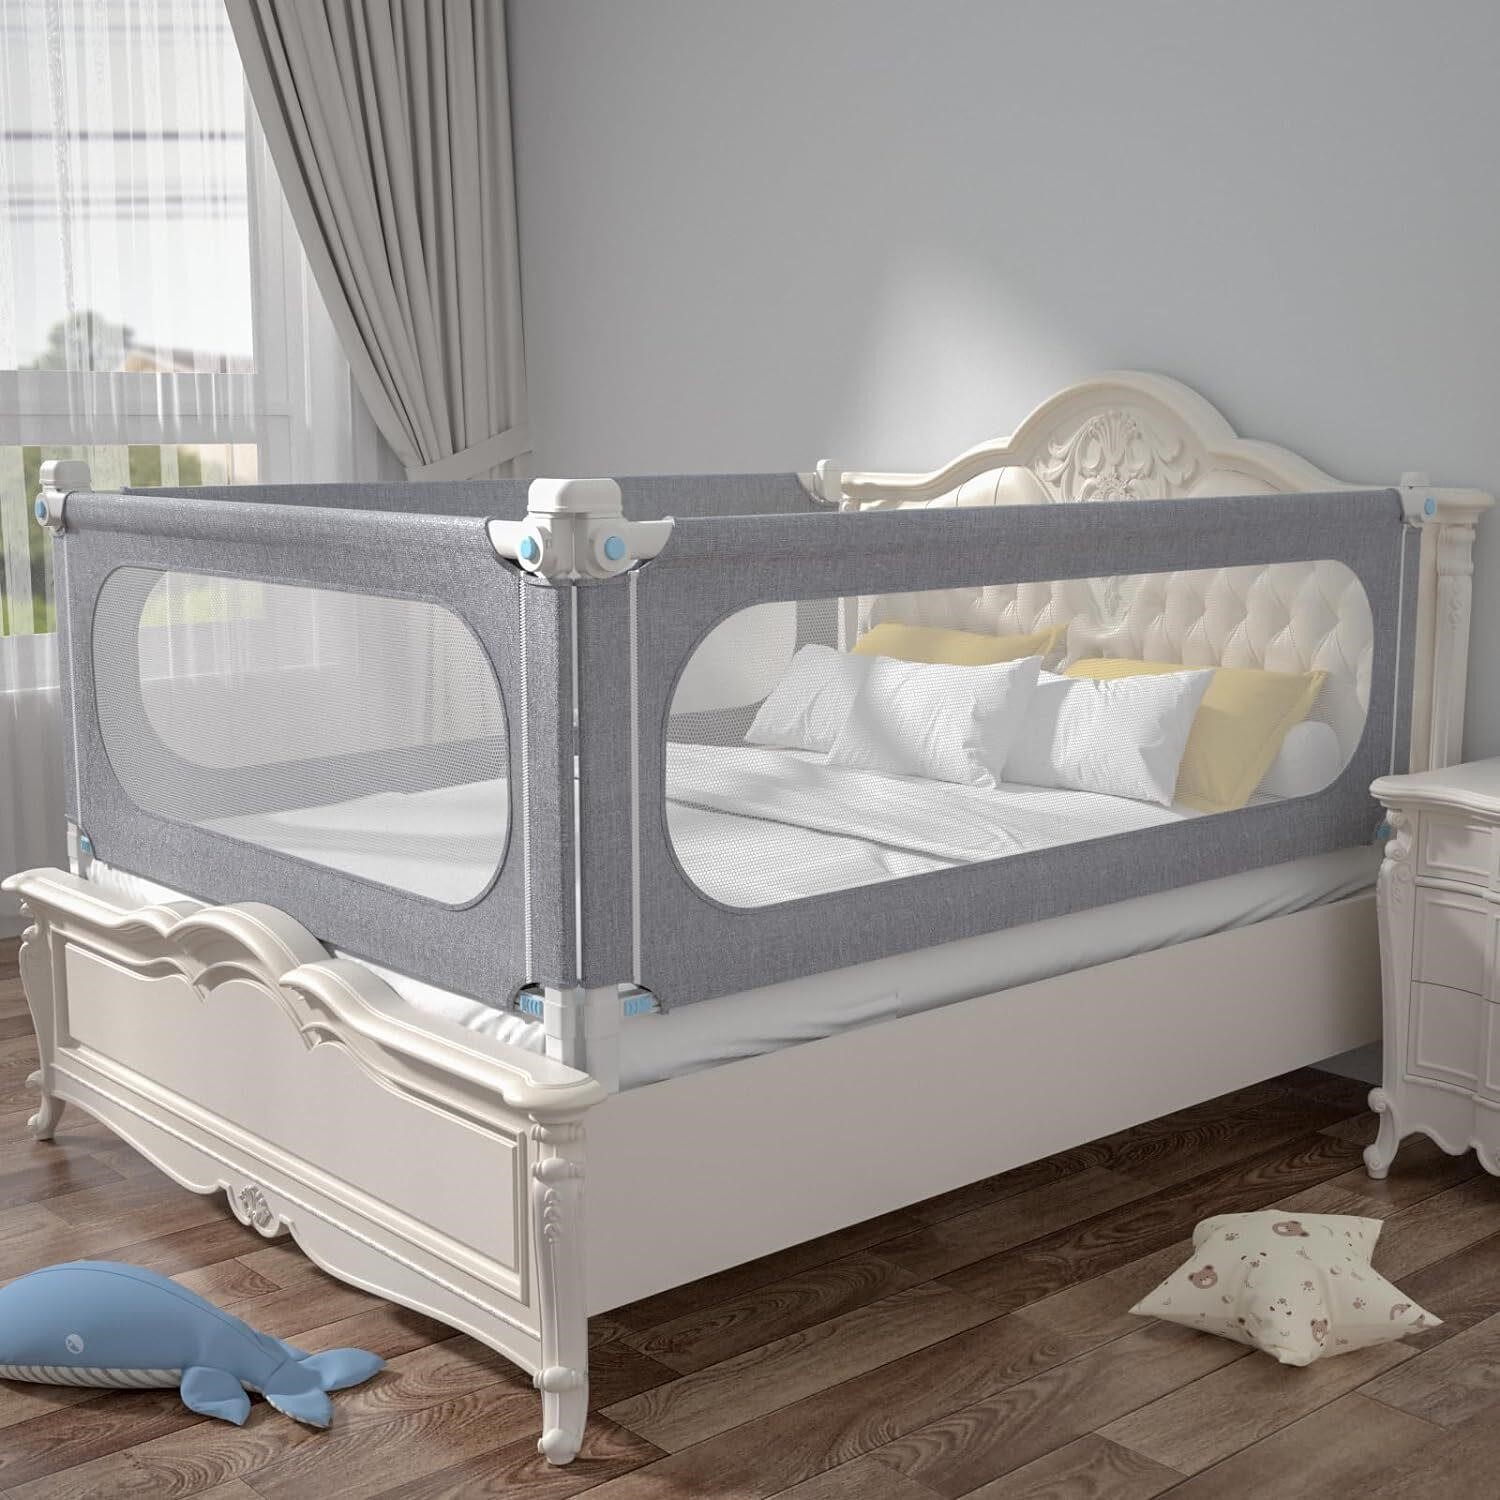 KEALIANA Bed Rail for Toddler 82(L) 28(H)